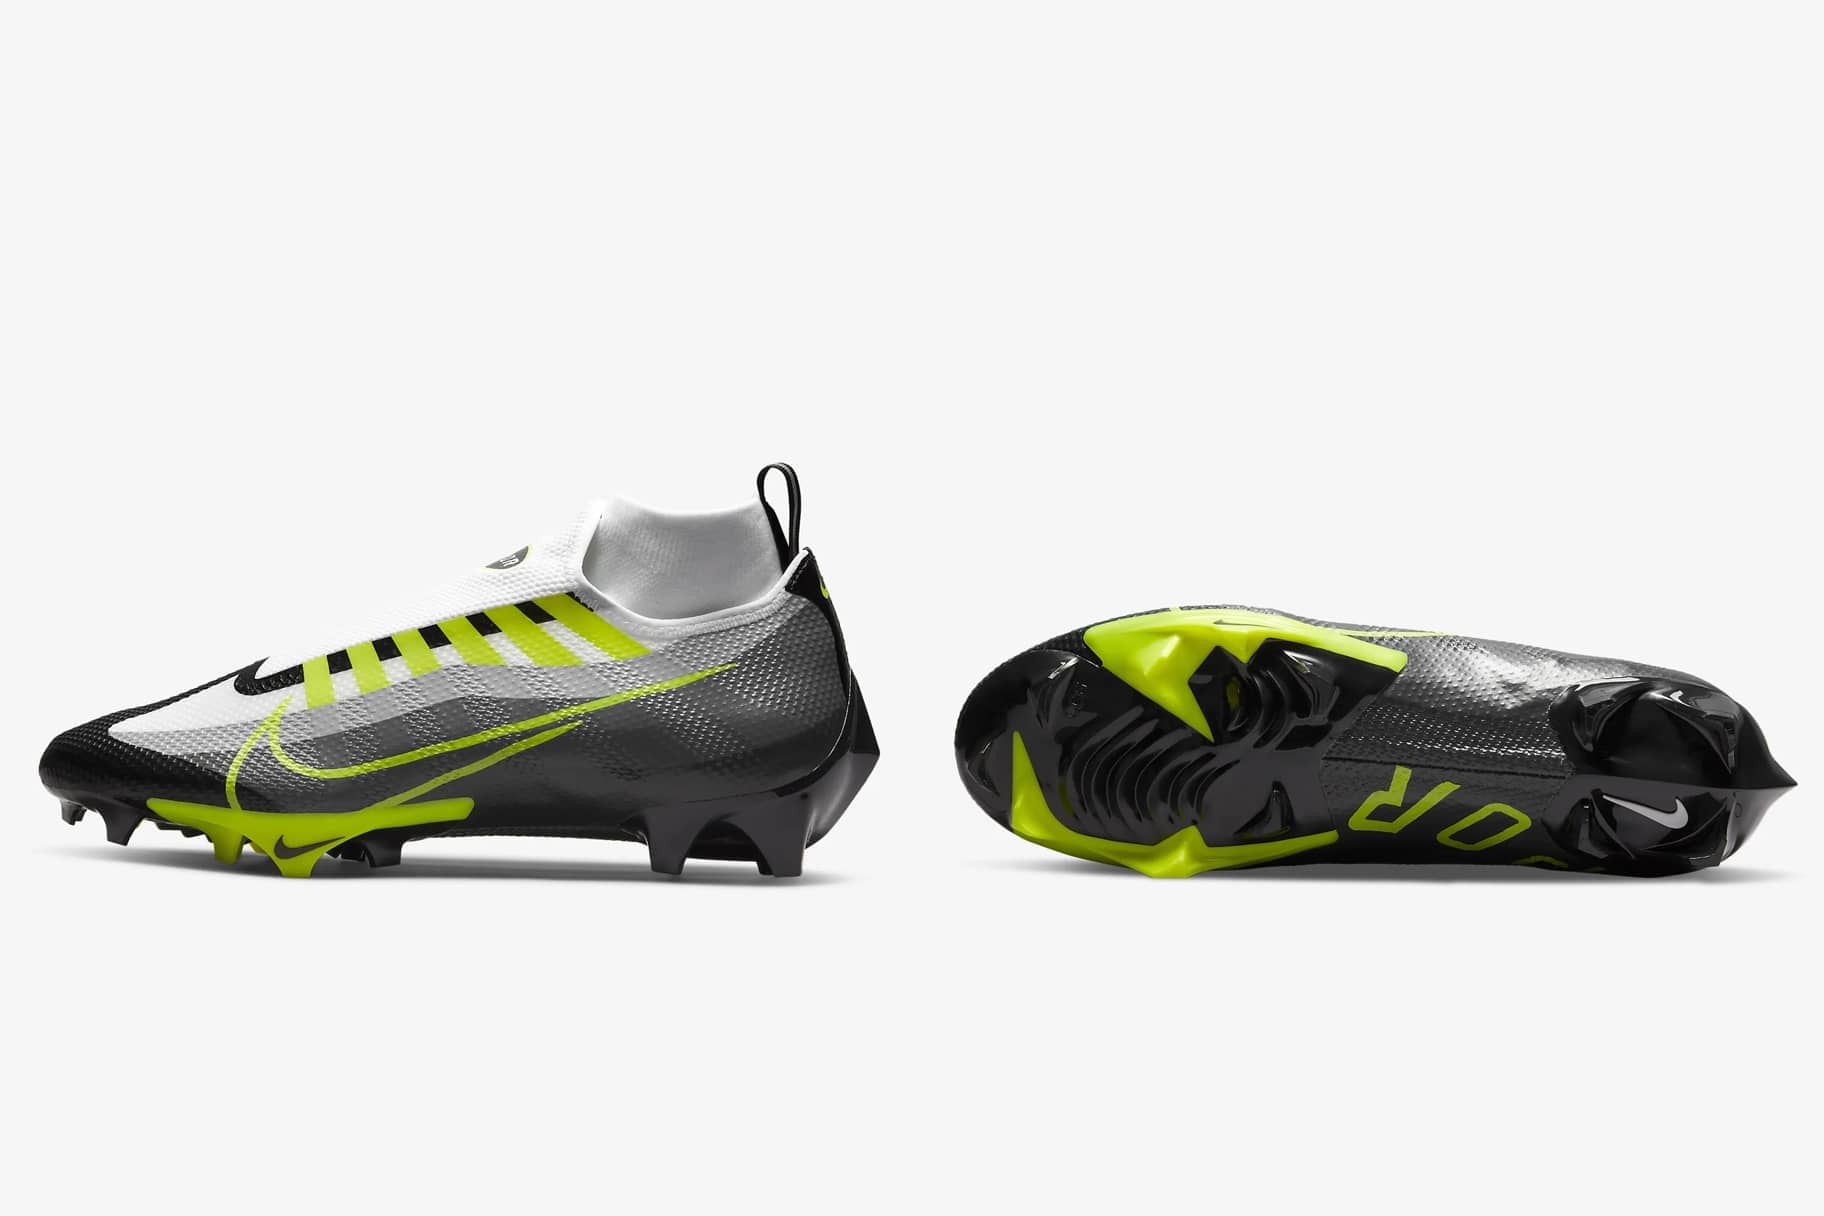 The Best Nike Cleats to Wear This Season. Nike.com